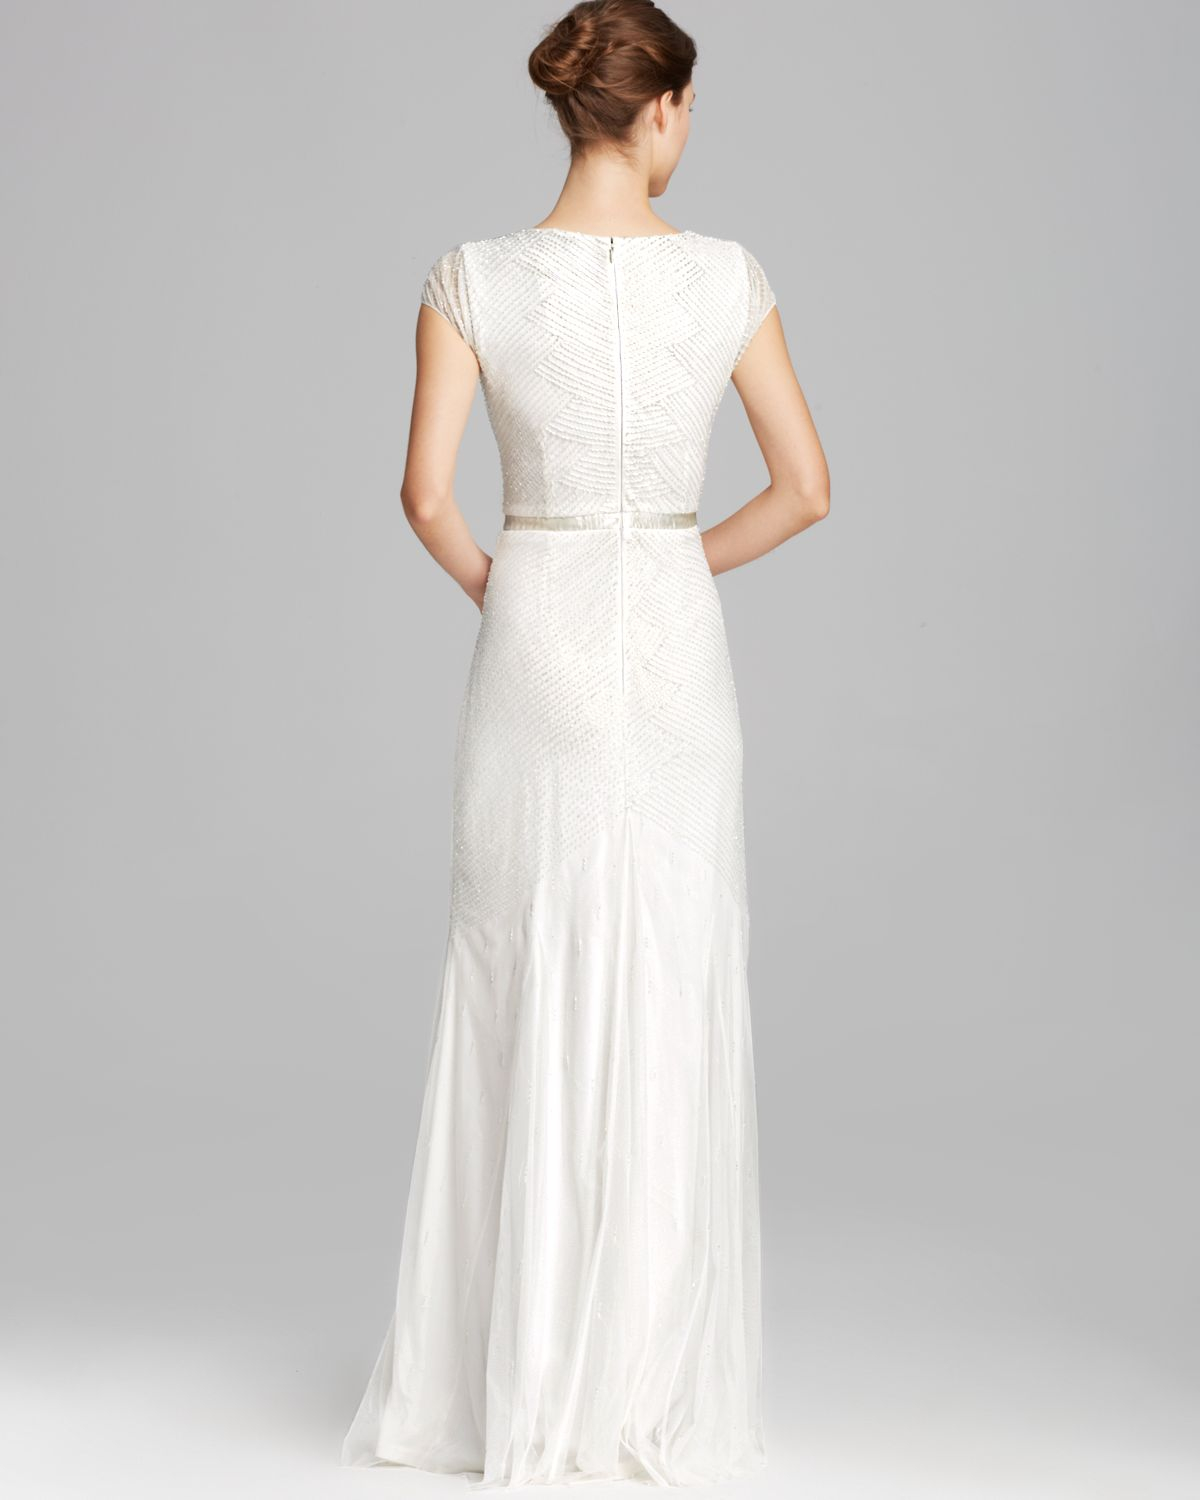 Adrianna Papell Gown - Cap Sleeve V Neck Beaded in Ivory (White) - Lyst